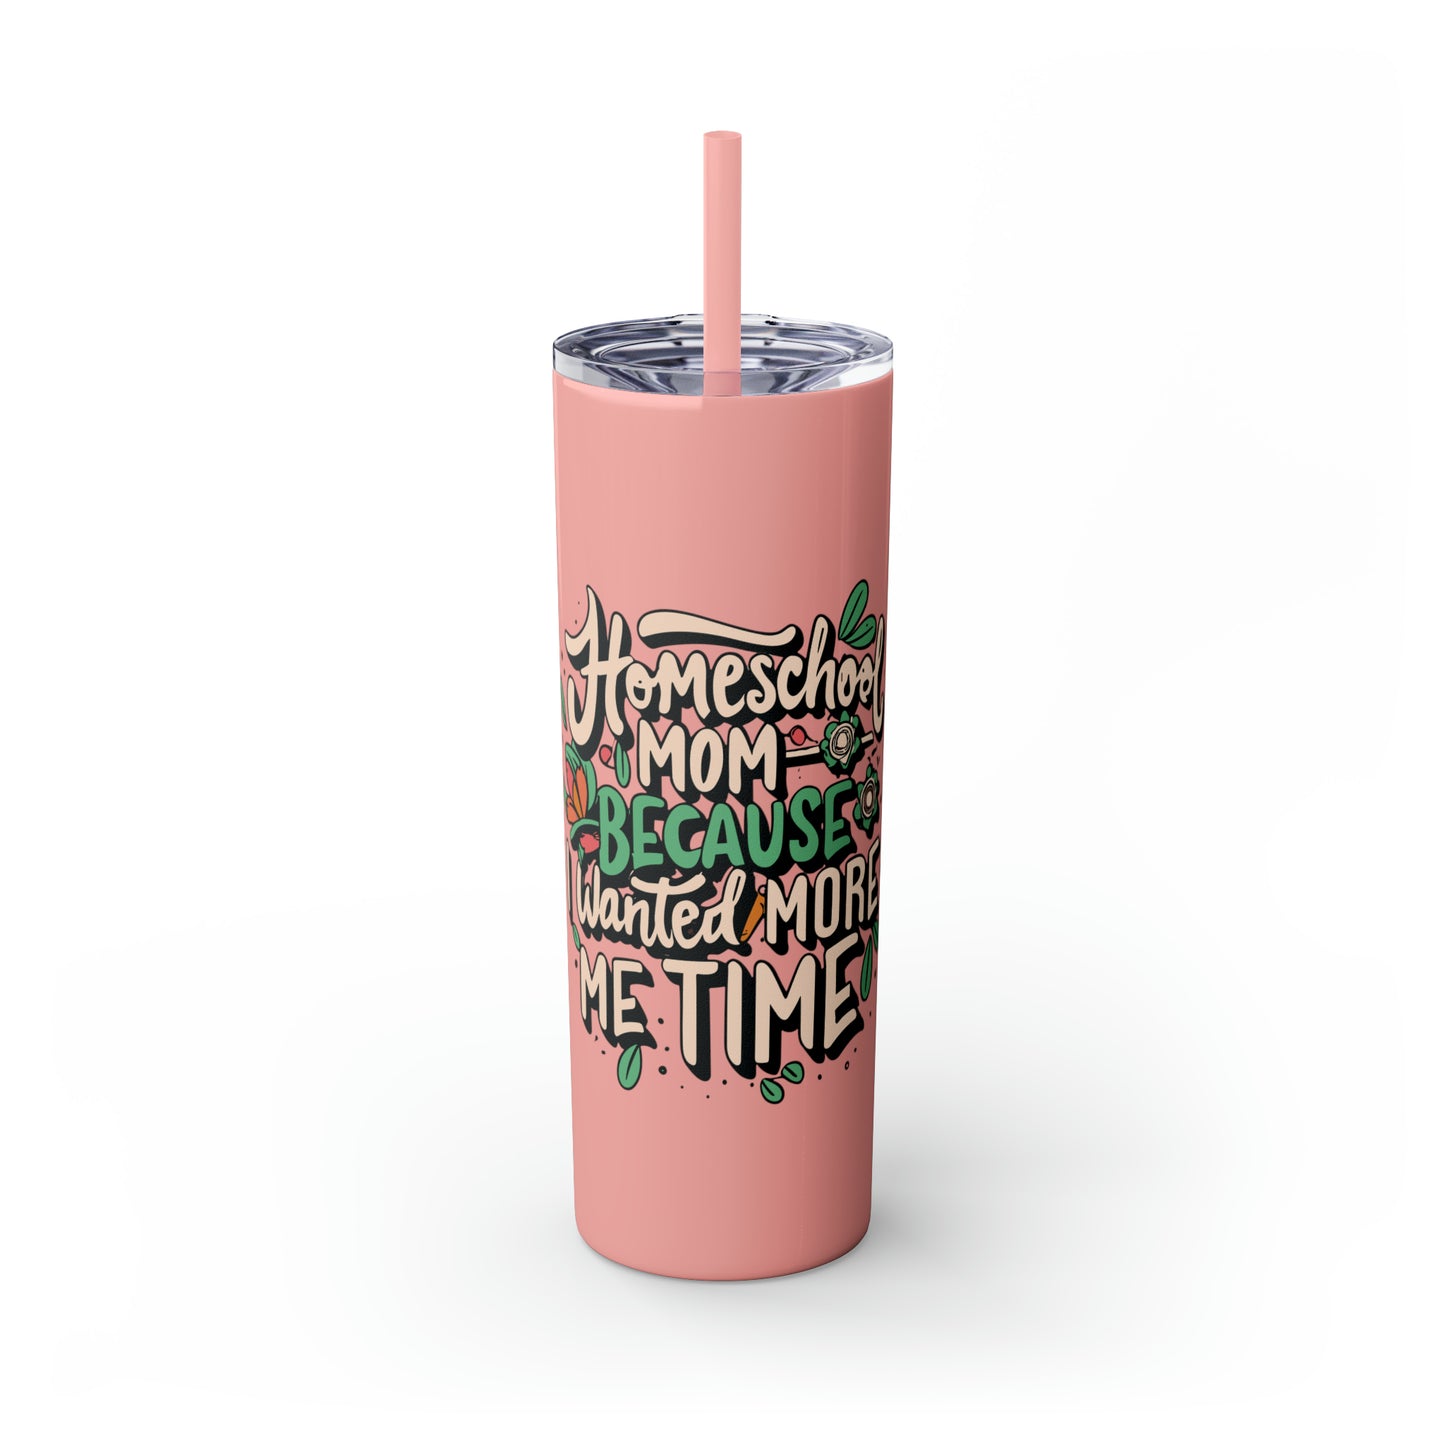 Homeschool Mom Skinny Tumbler with Straw - "Homeschool Mom Because I Wanted More Me Time"